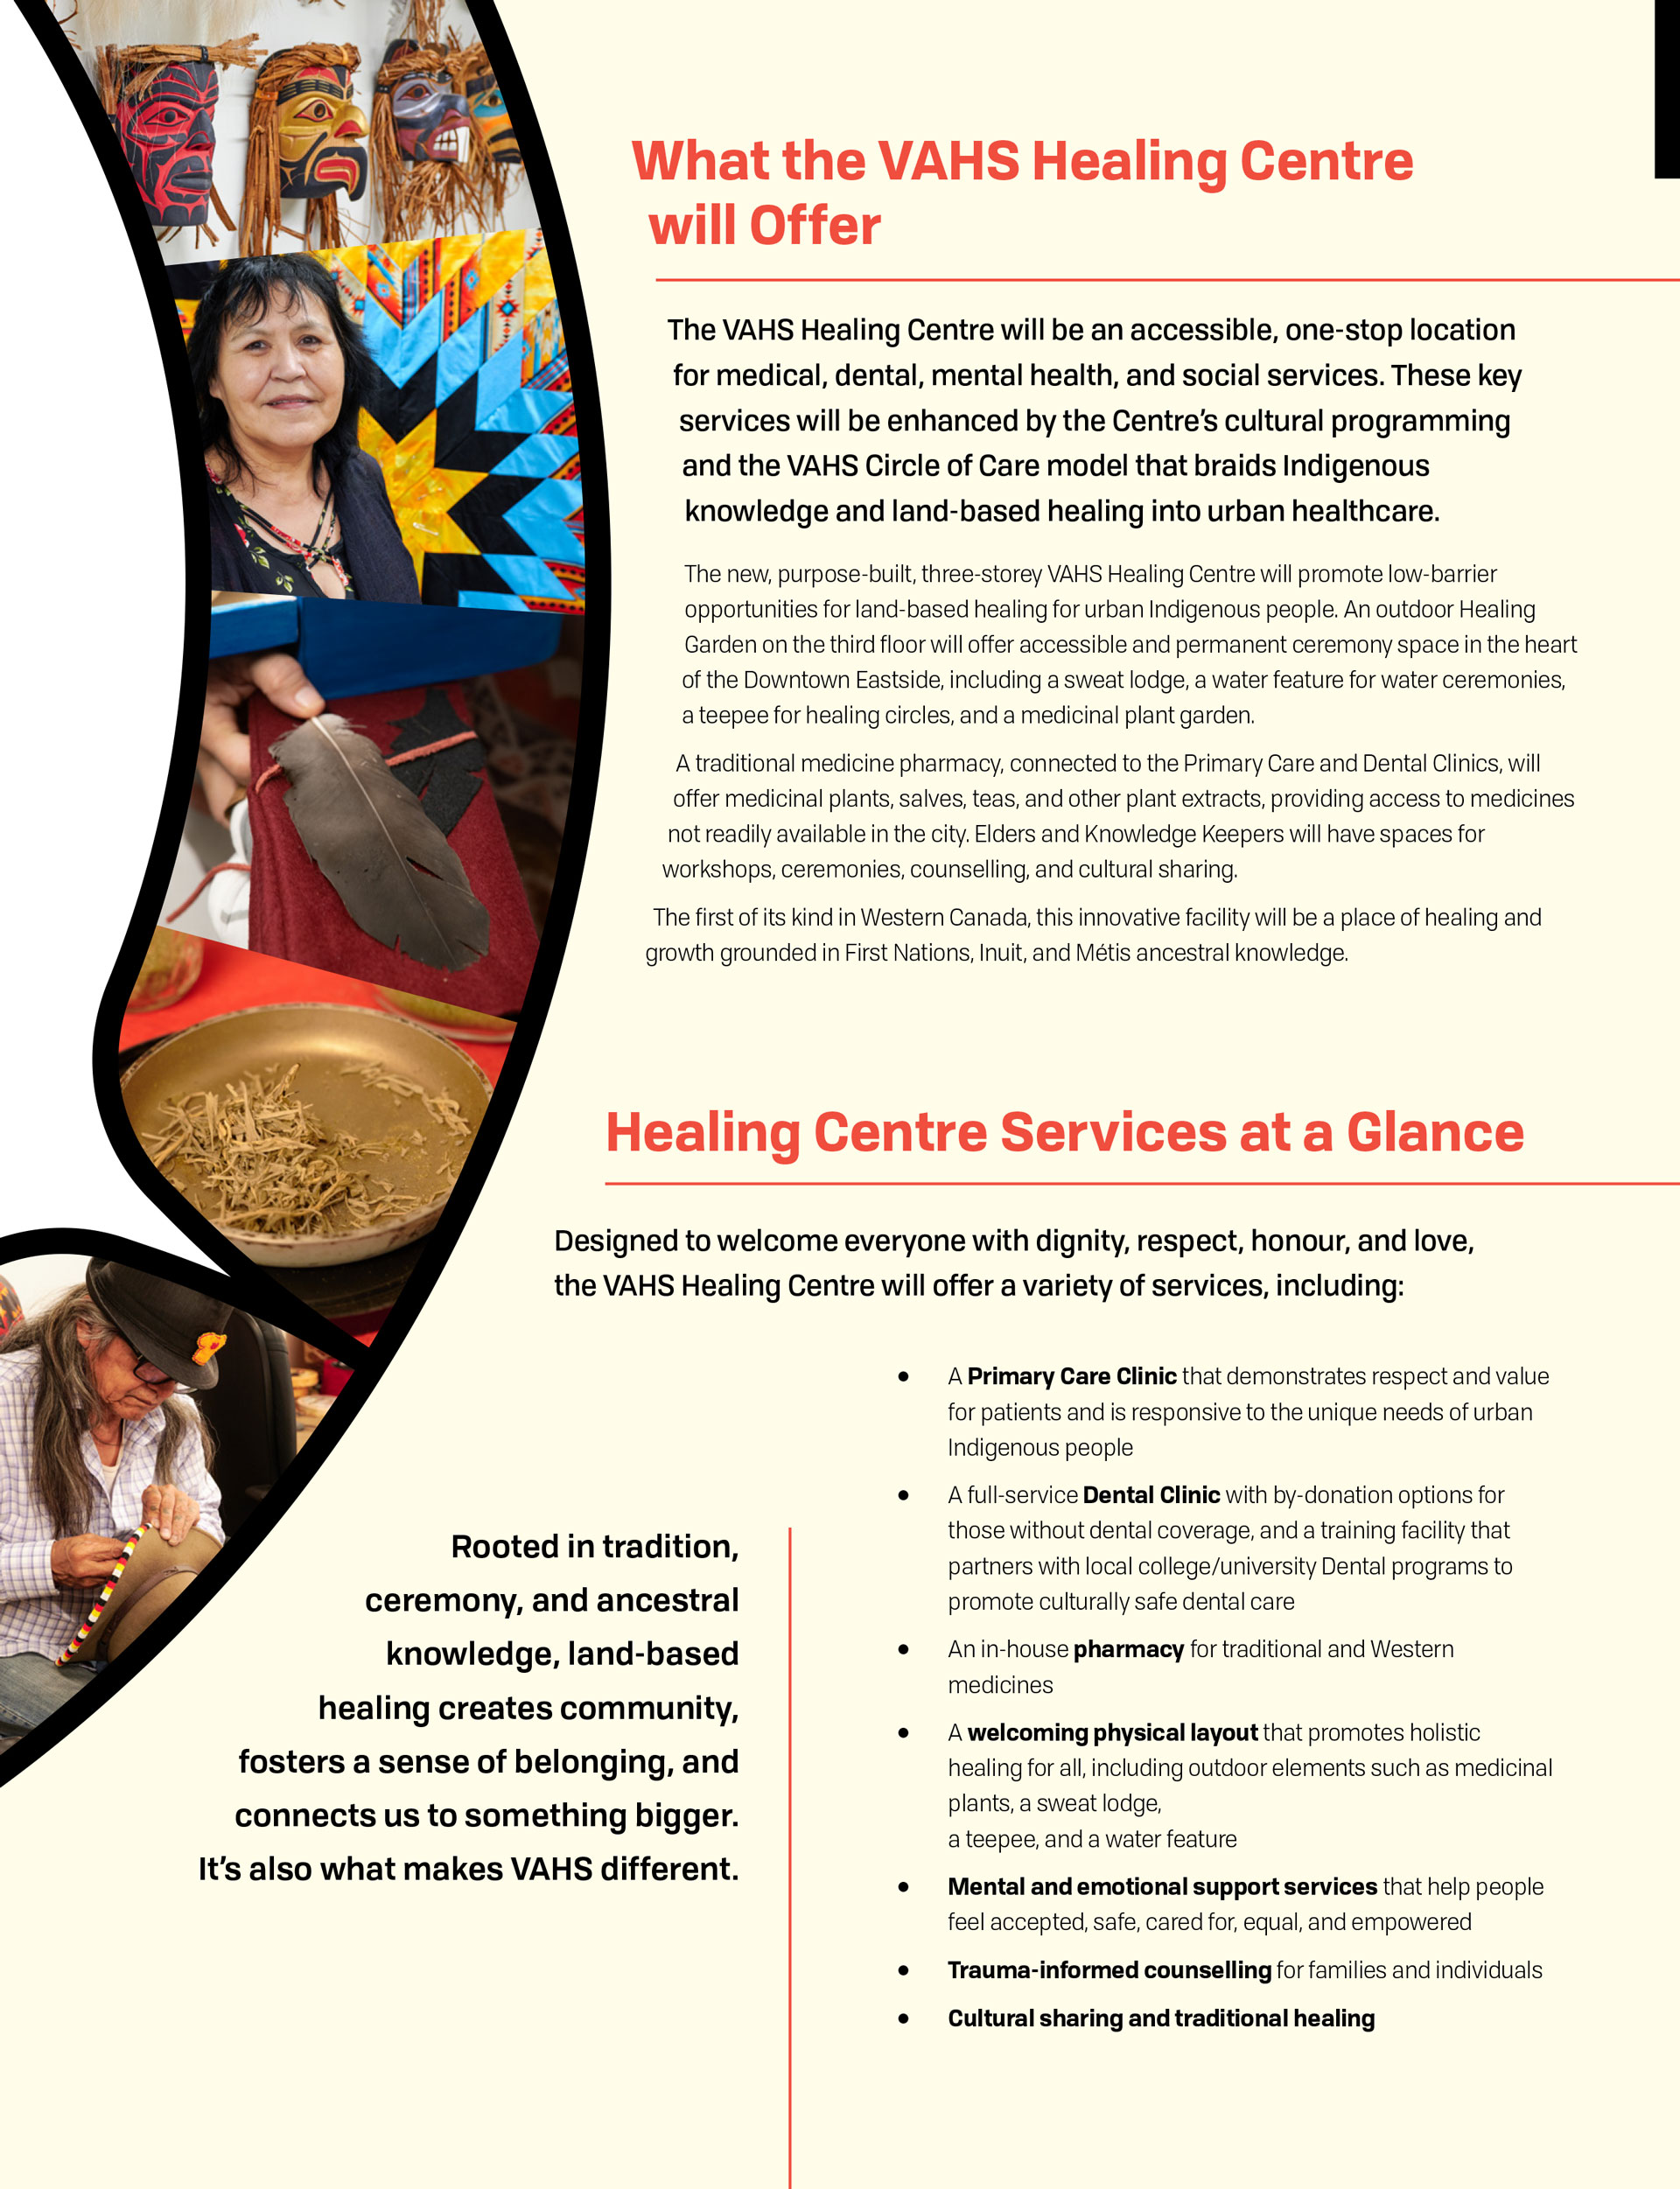 VAHS Healing Centre brochure, page 3, What the VAHS Healing Centre will Offer